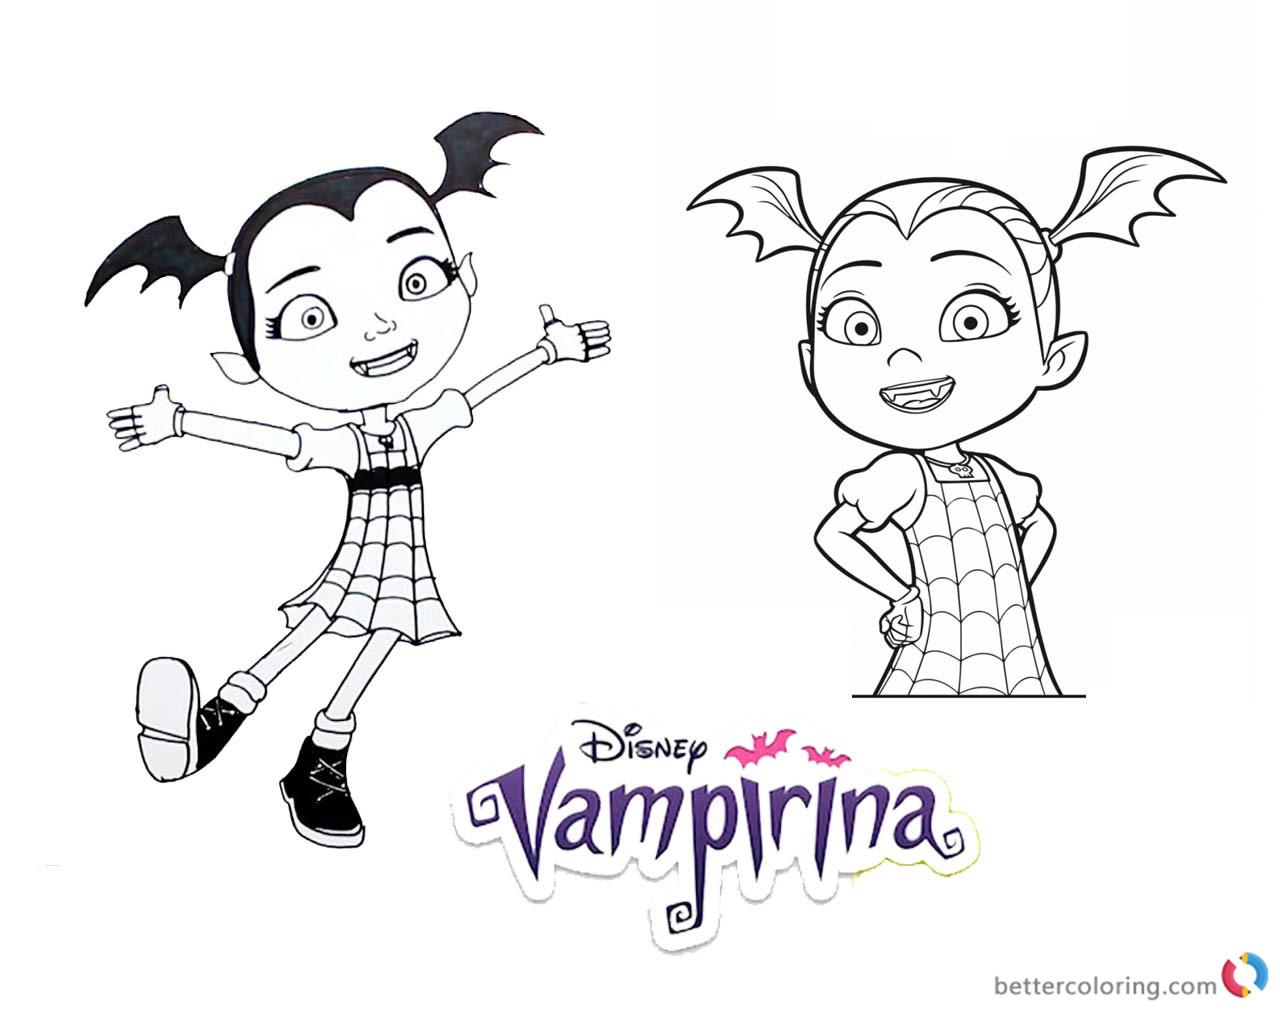 Vampirina coloring pages lineart Free Printable Coloring Pages